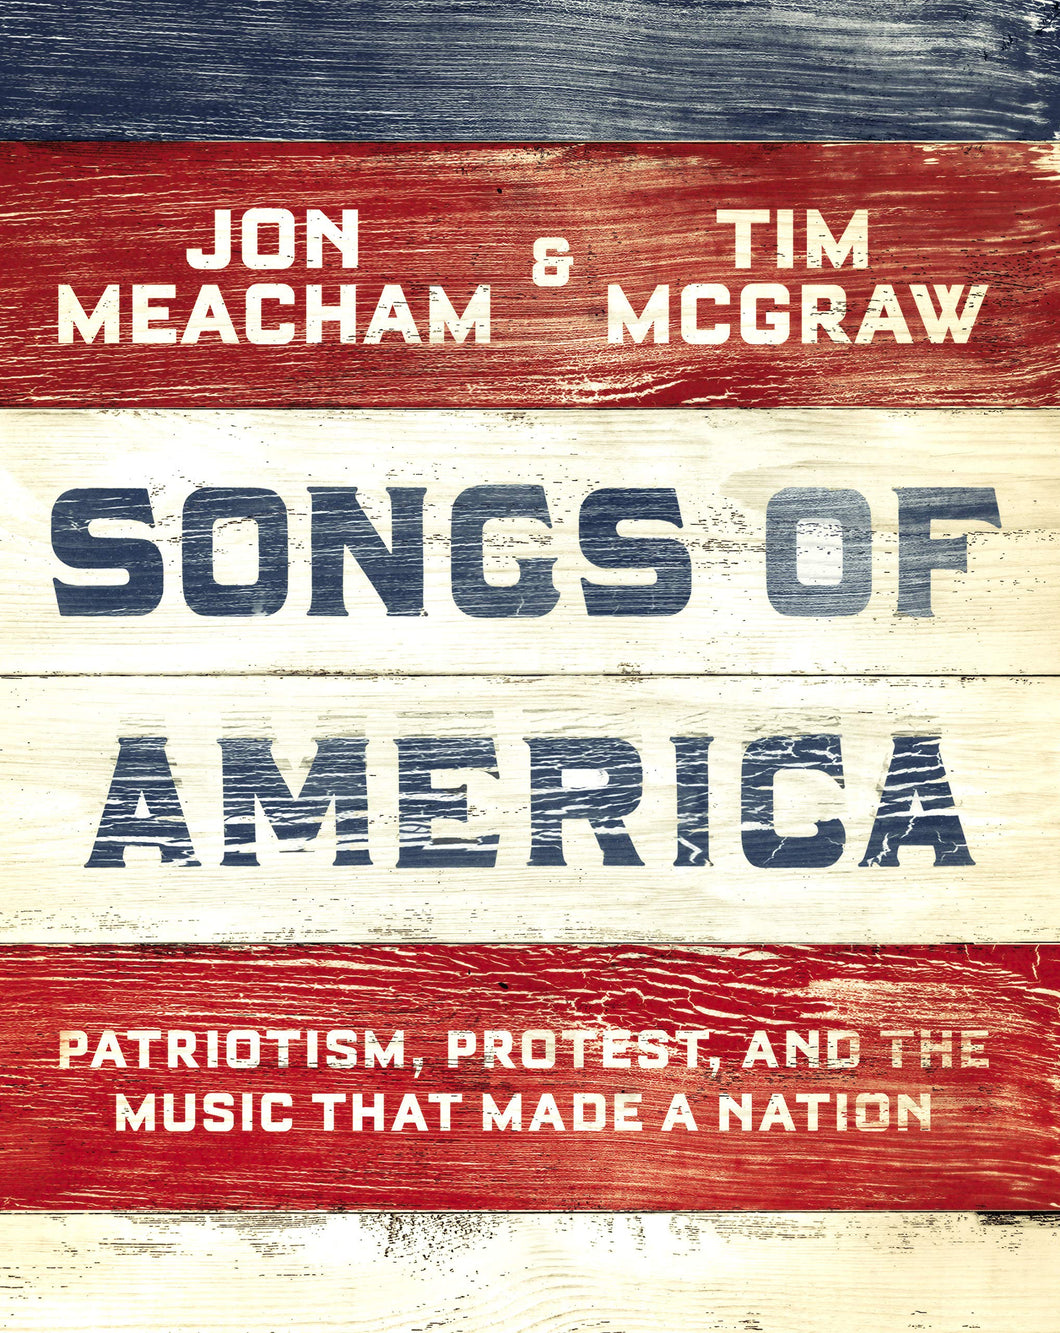 Songs of America: Patriotism, Protest, and the Music That Made a Nation